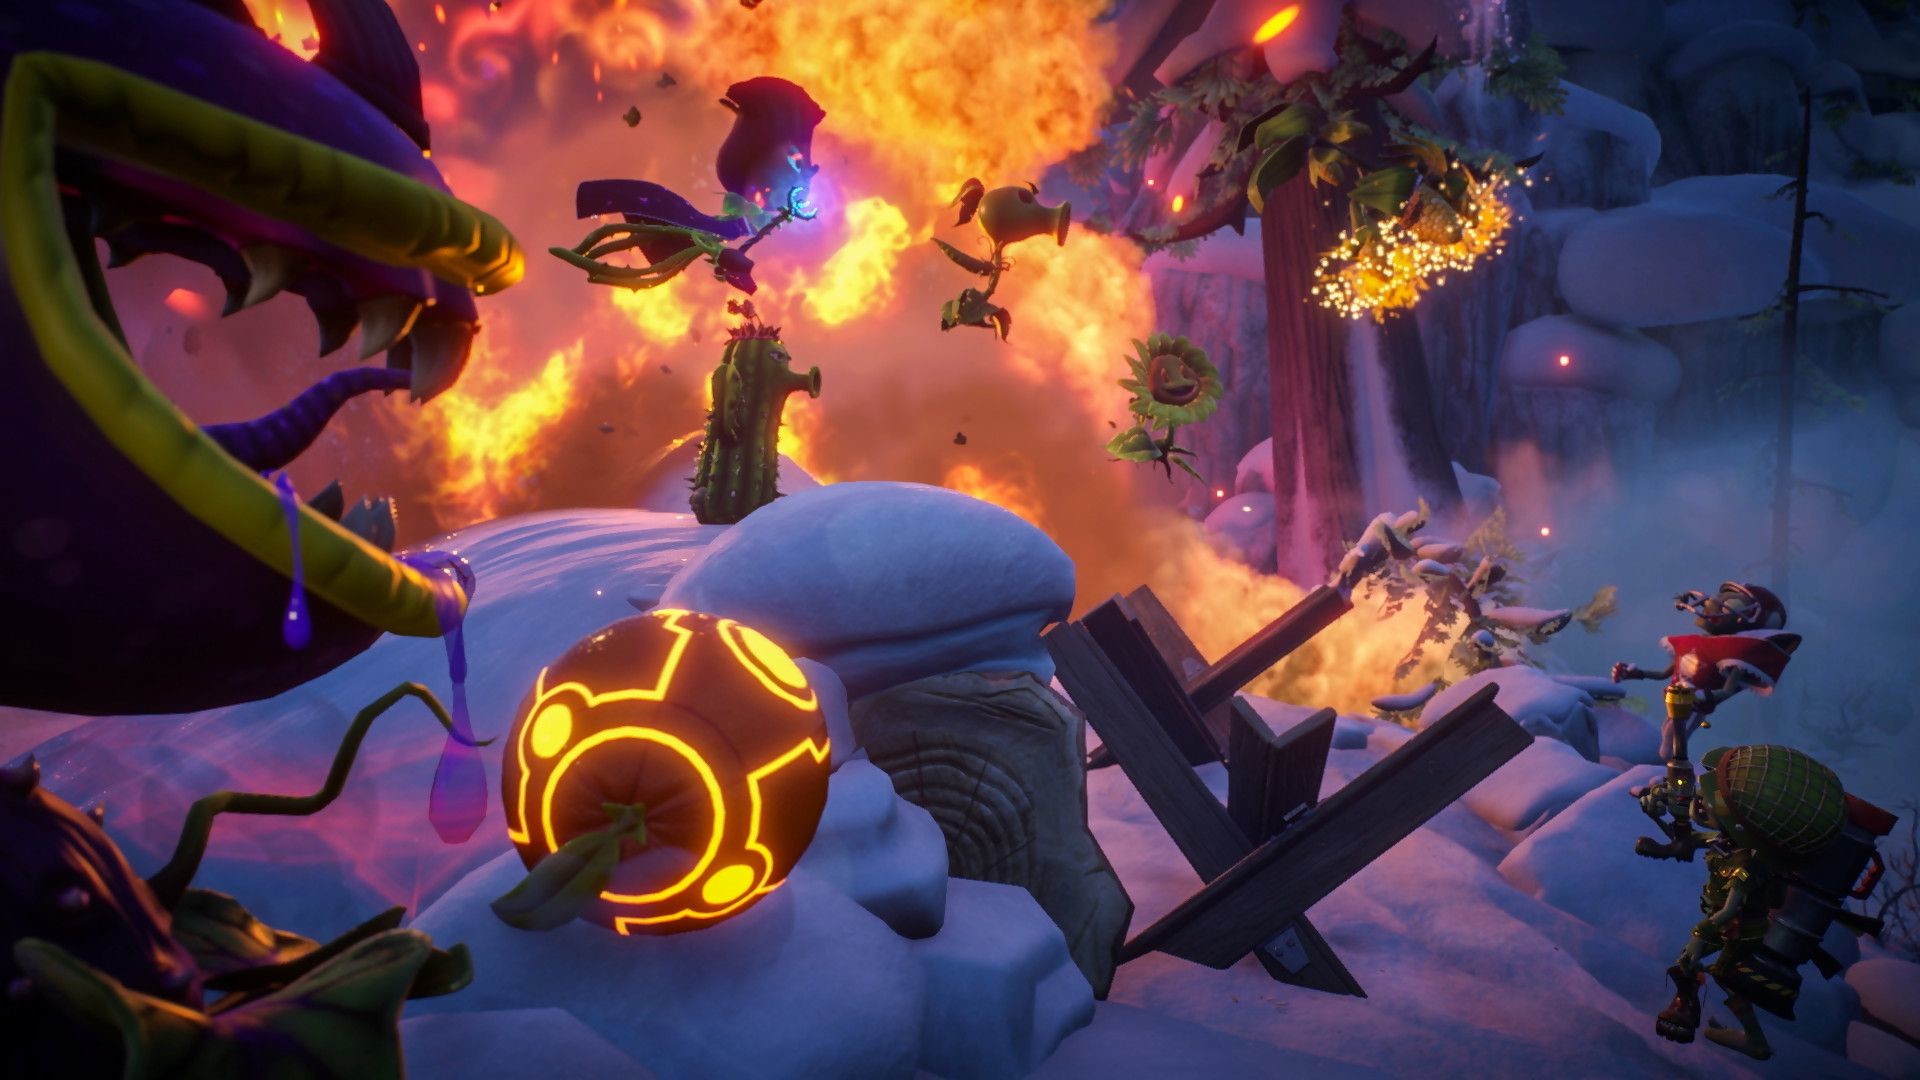 1920x1080 Check out the gameplay trailer for “Plants vs. Zombies: Garden Warfare 2.”